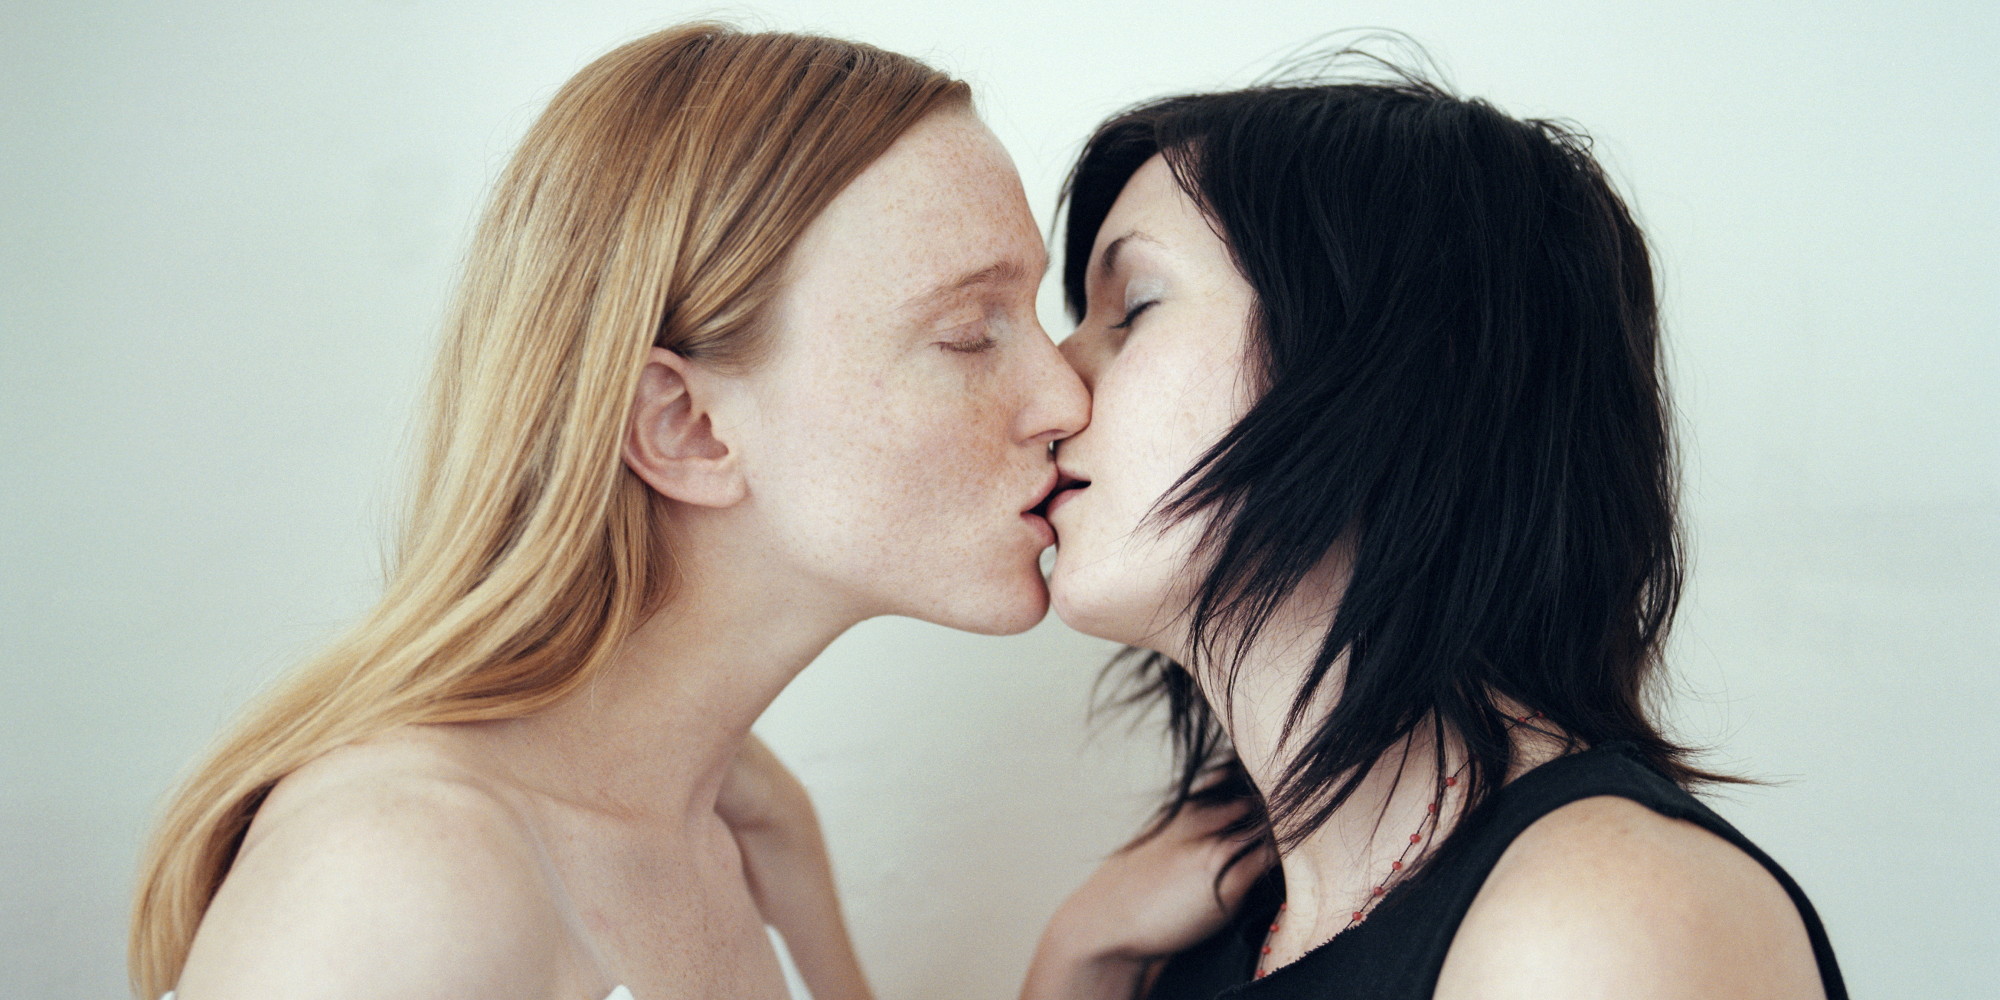 Extremely Hot Teen Lesbians Fuck 115